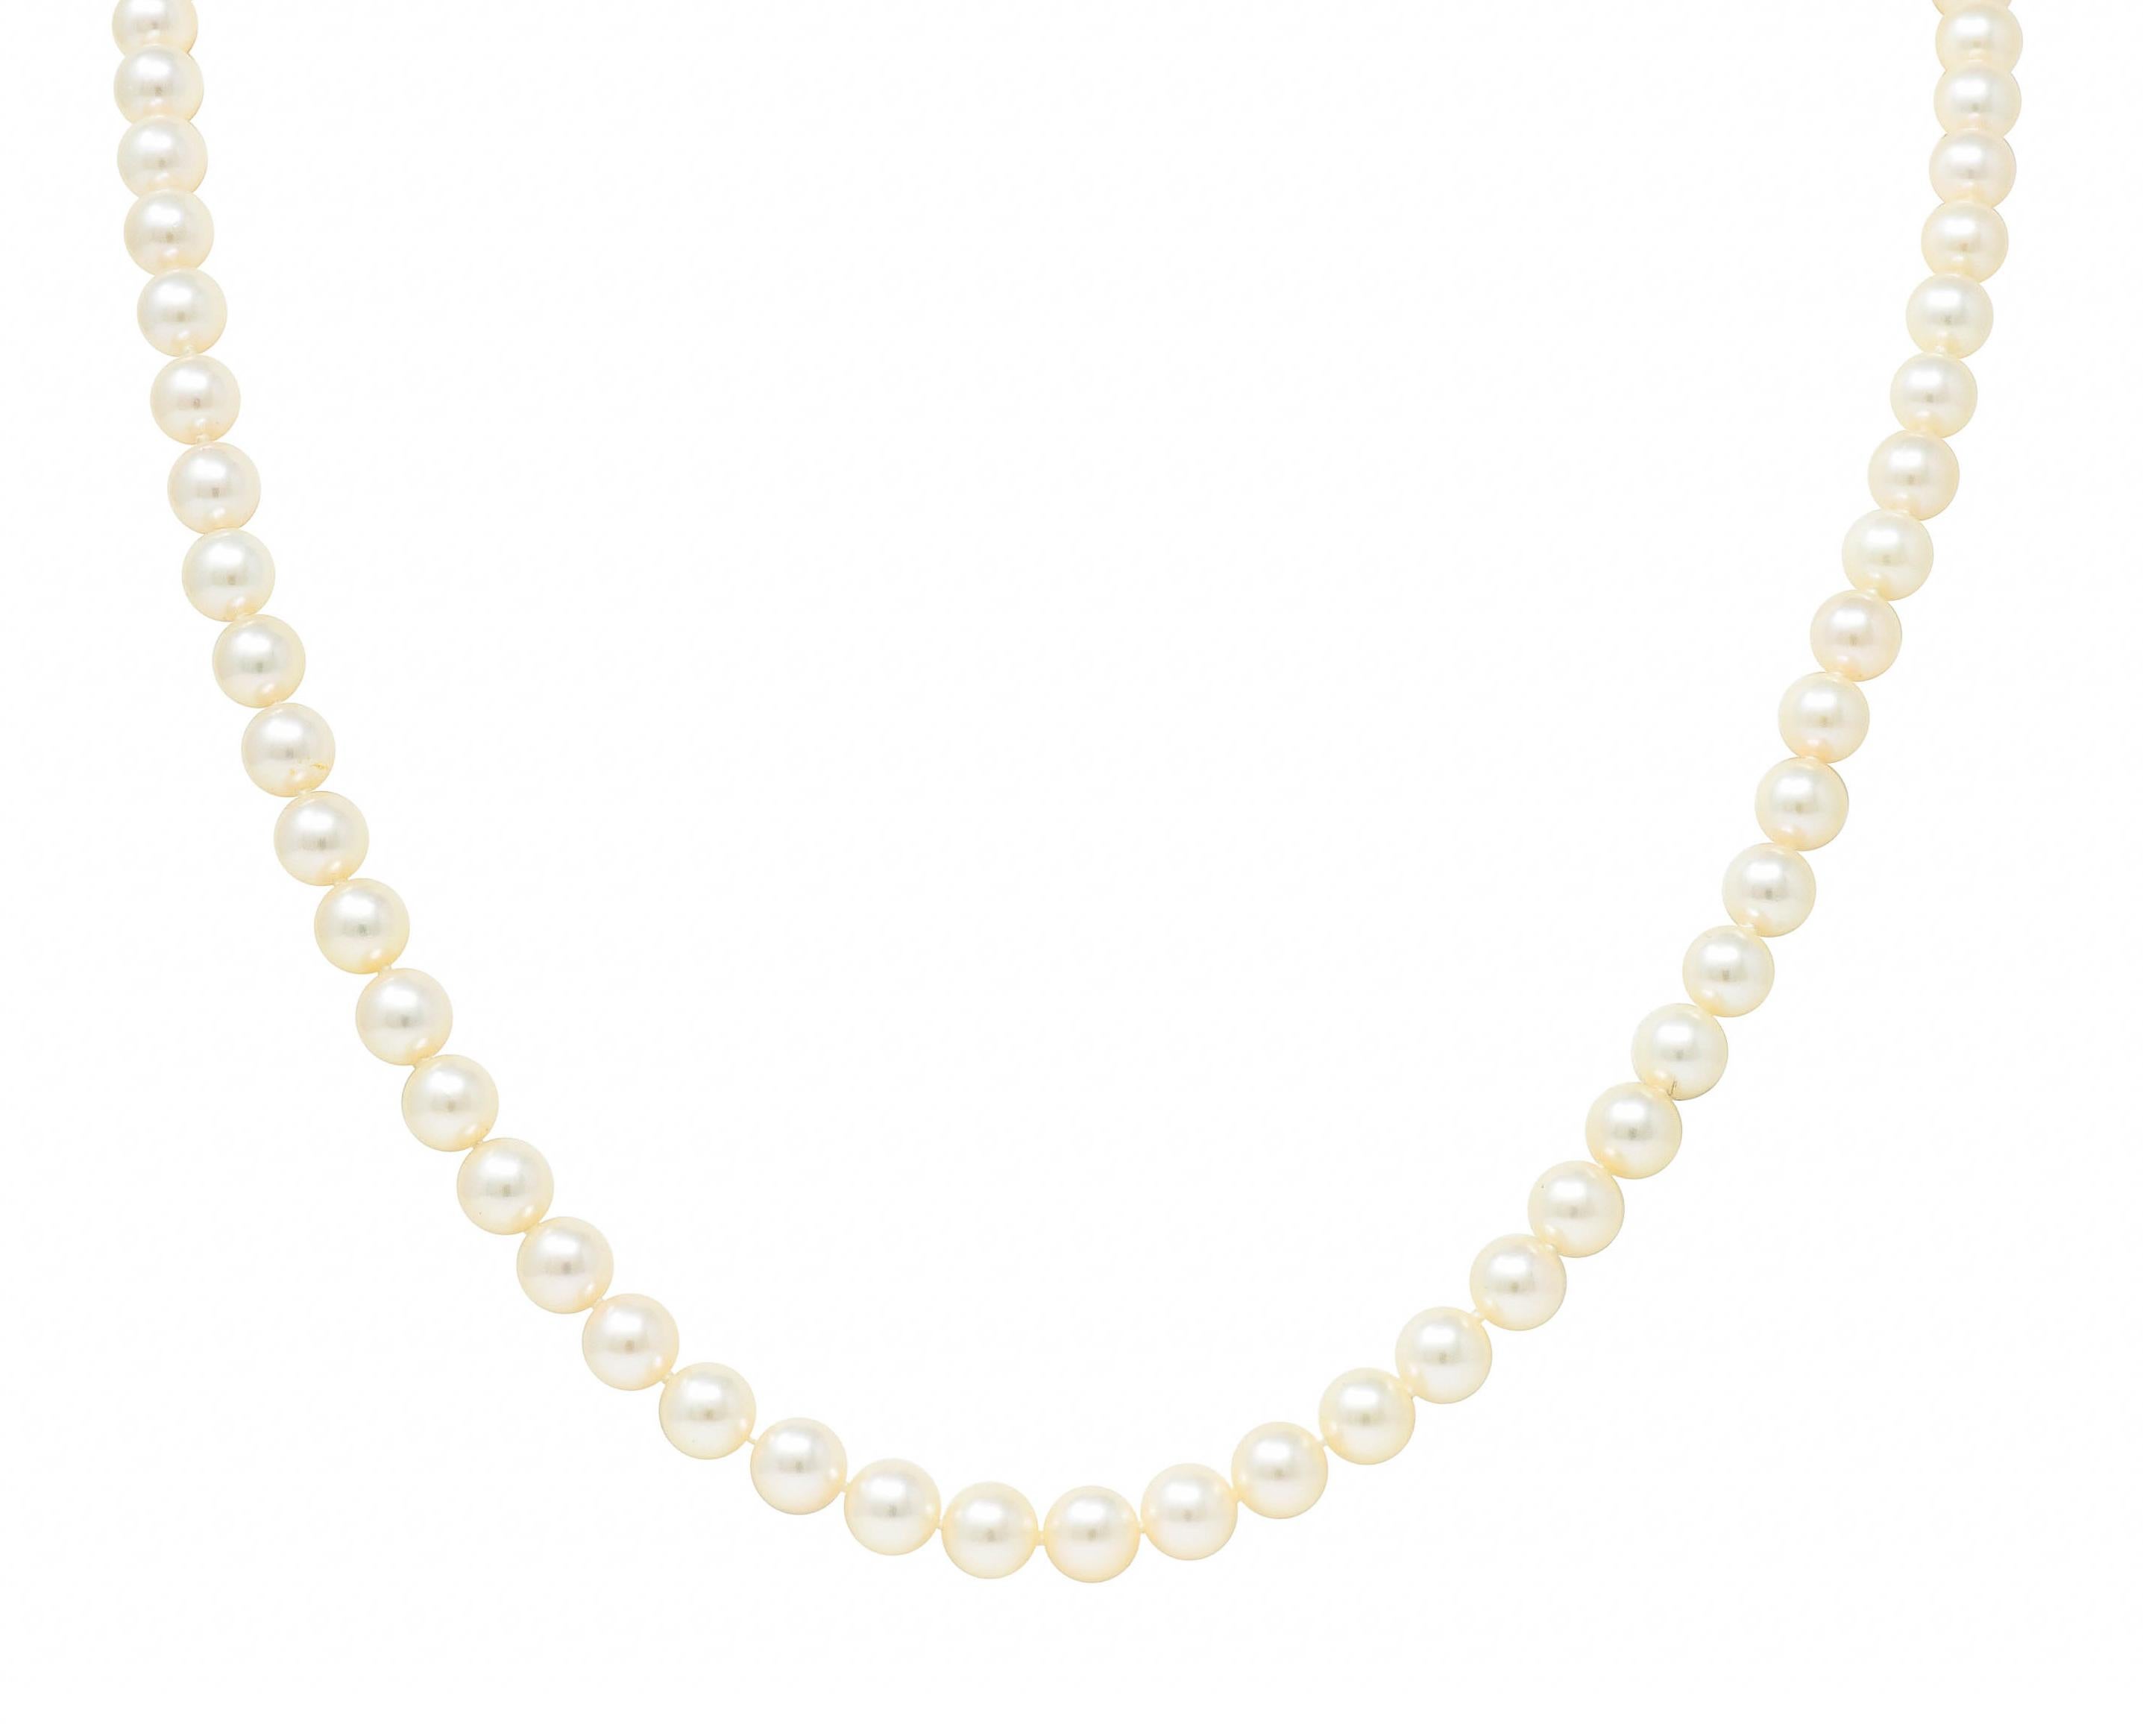 Strand necklace is hand knotted and comprised of 6.5 mm round pearls

Well matched in cream body color with some rosè overtones and excellent luster

Completes as an 18 karat gold pearl clasp - deeply engraved and forms a knot motif

Accented by a